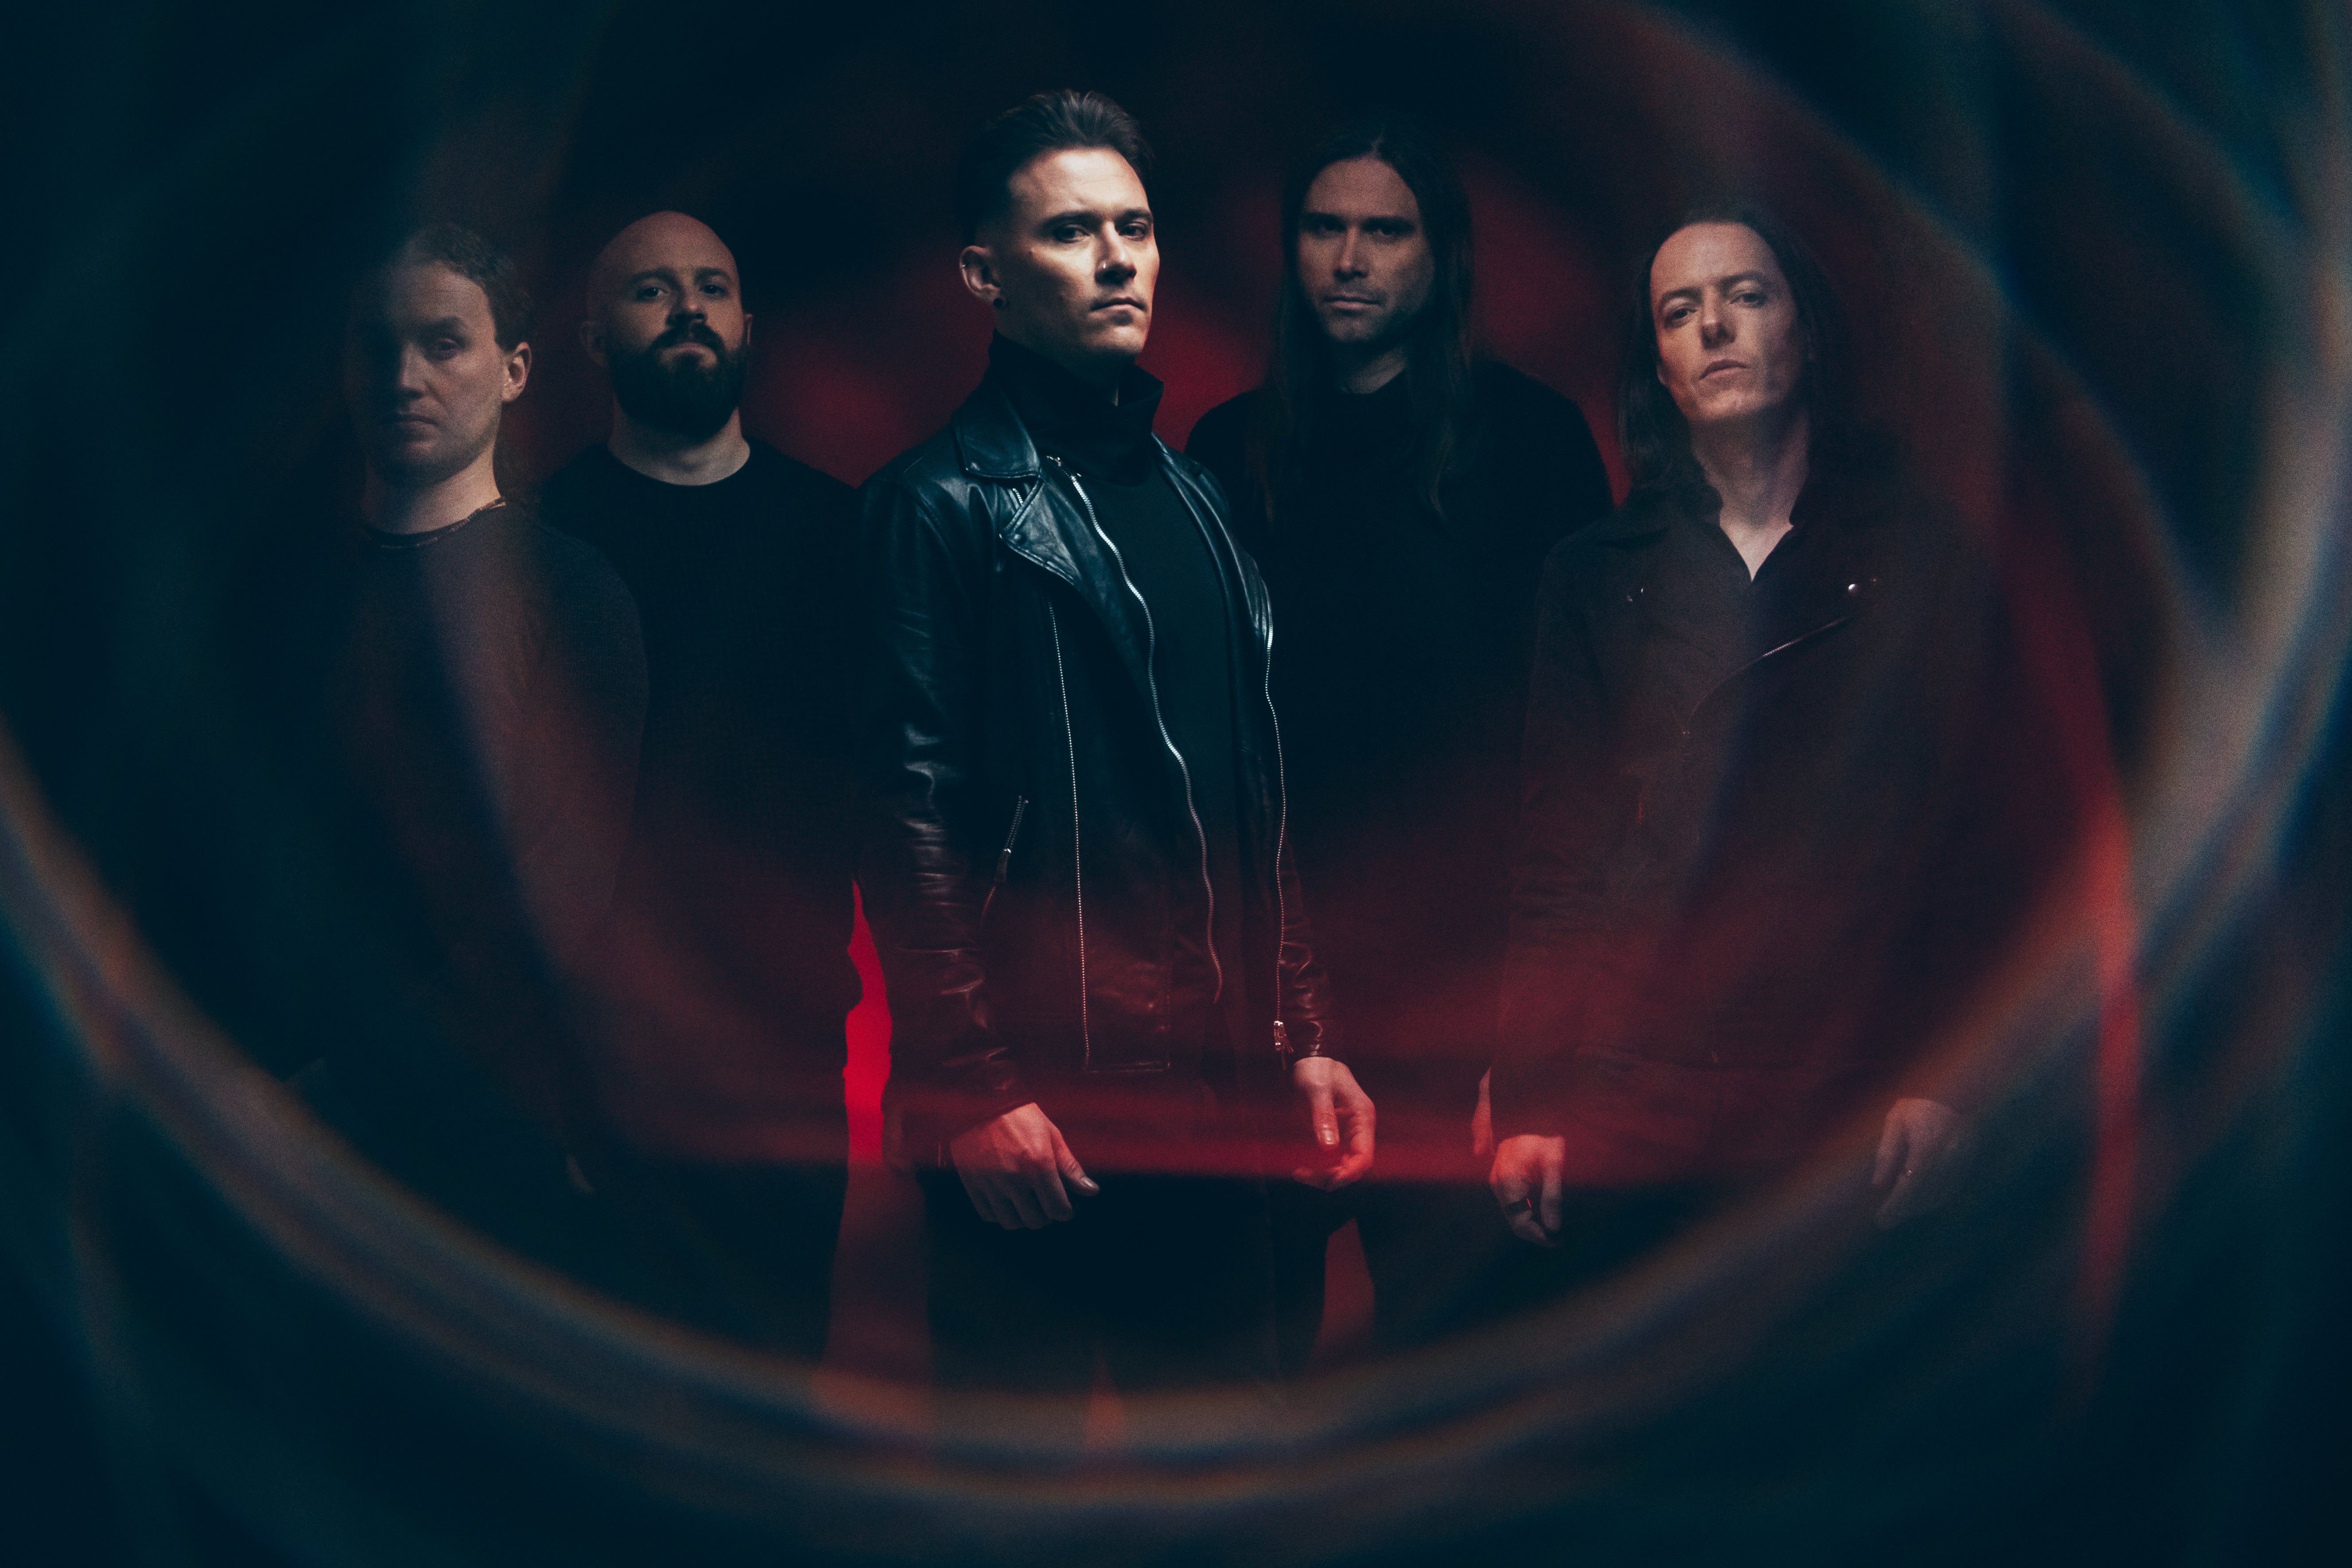 Image used with permission from Ticketmaster | TesseracT tickets